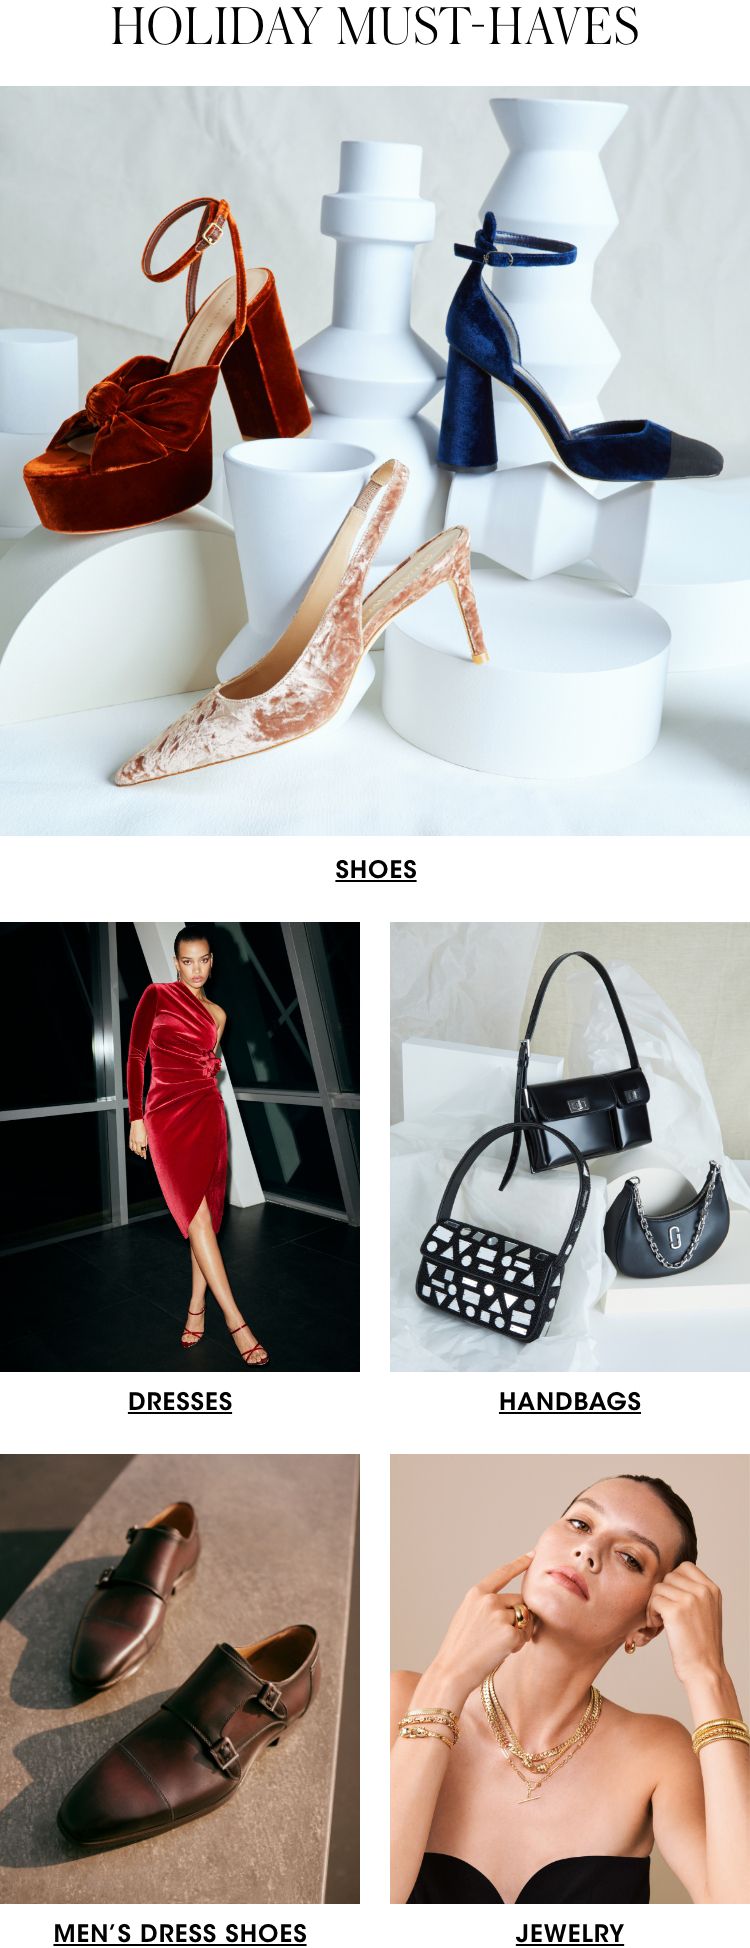 Hot Selling Shoes Matching Bags Set Italian Women's Party Shoes and Bag Sets in Multi Colors Women's High Sandals and Handbag Sets Photo Color2 / 40